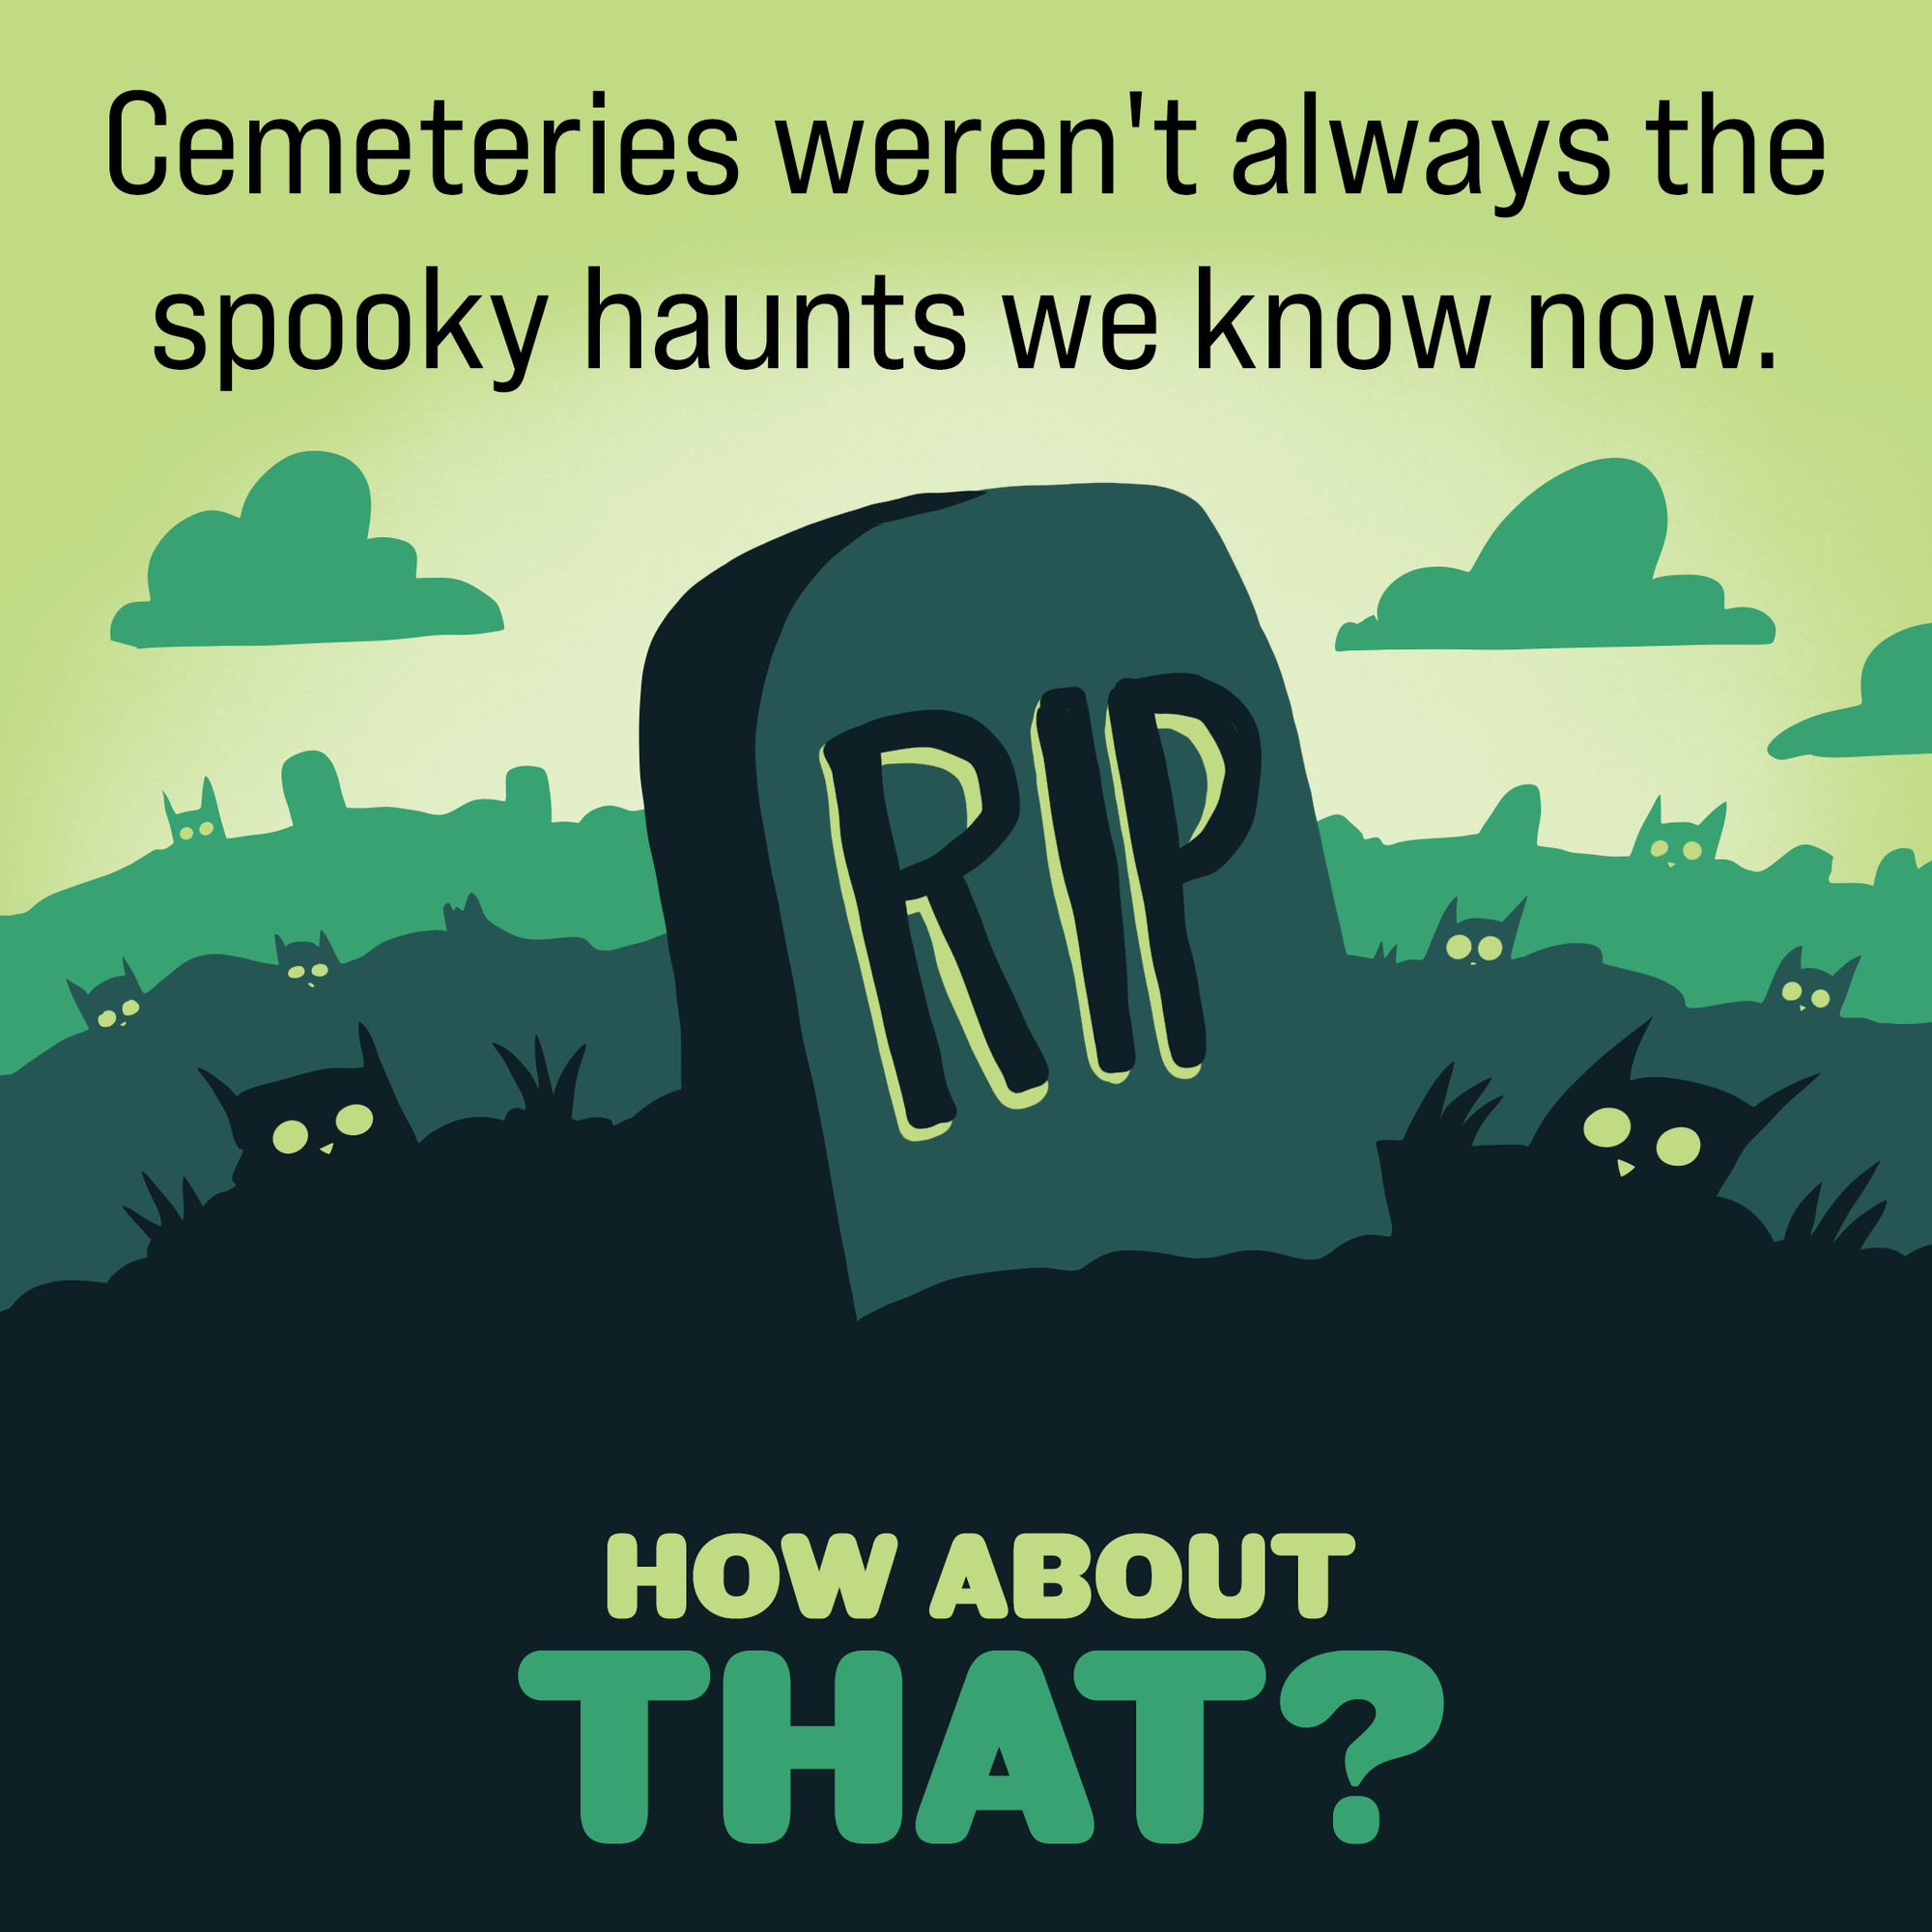 How About That? Cemeteries weren't always the spooky haunts we know now.